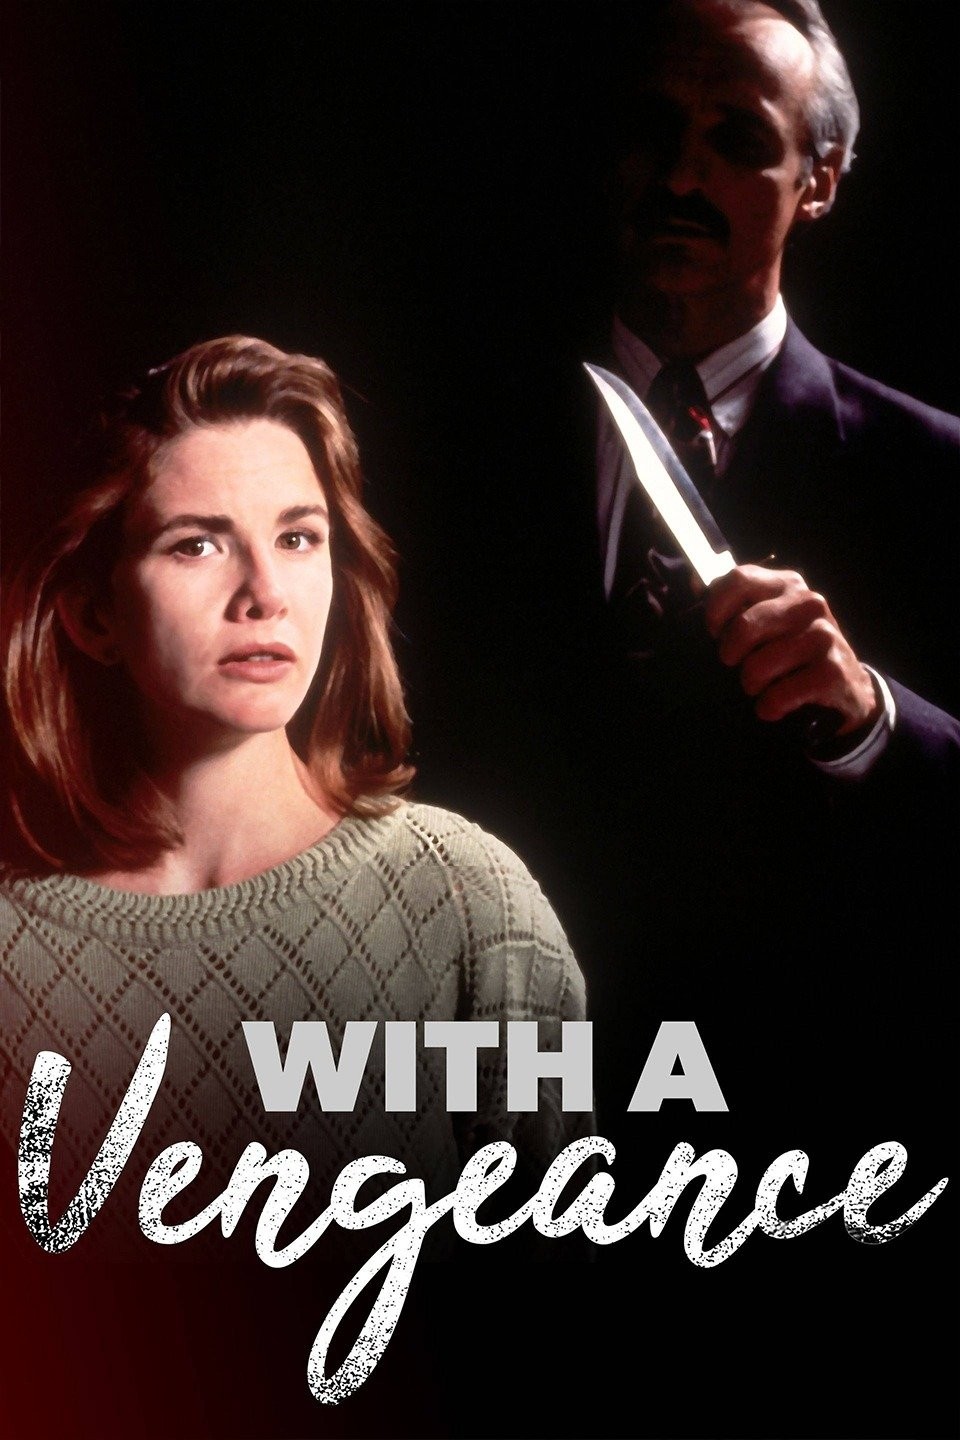 Vengeance streaming: where to watch movie online?